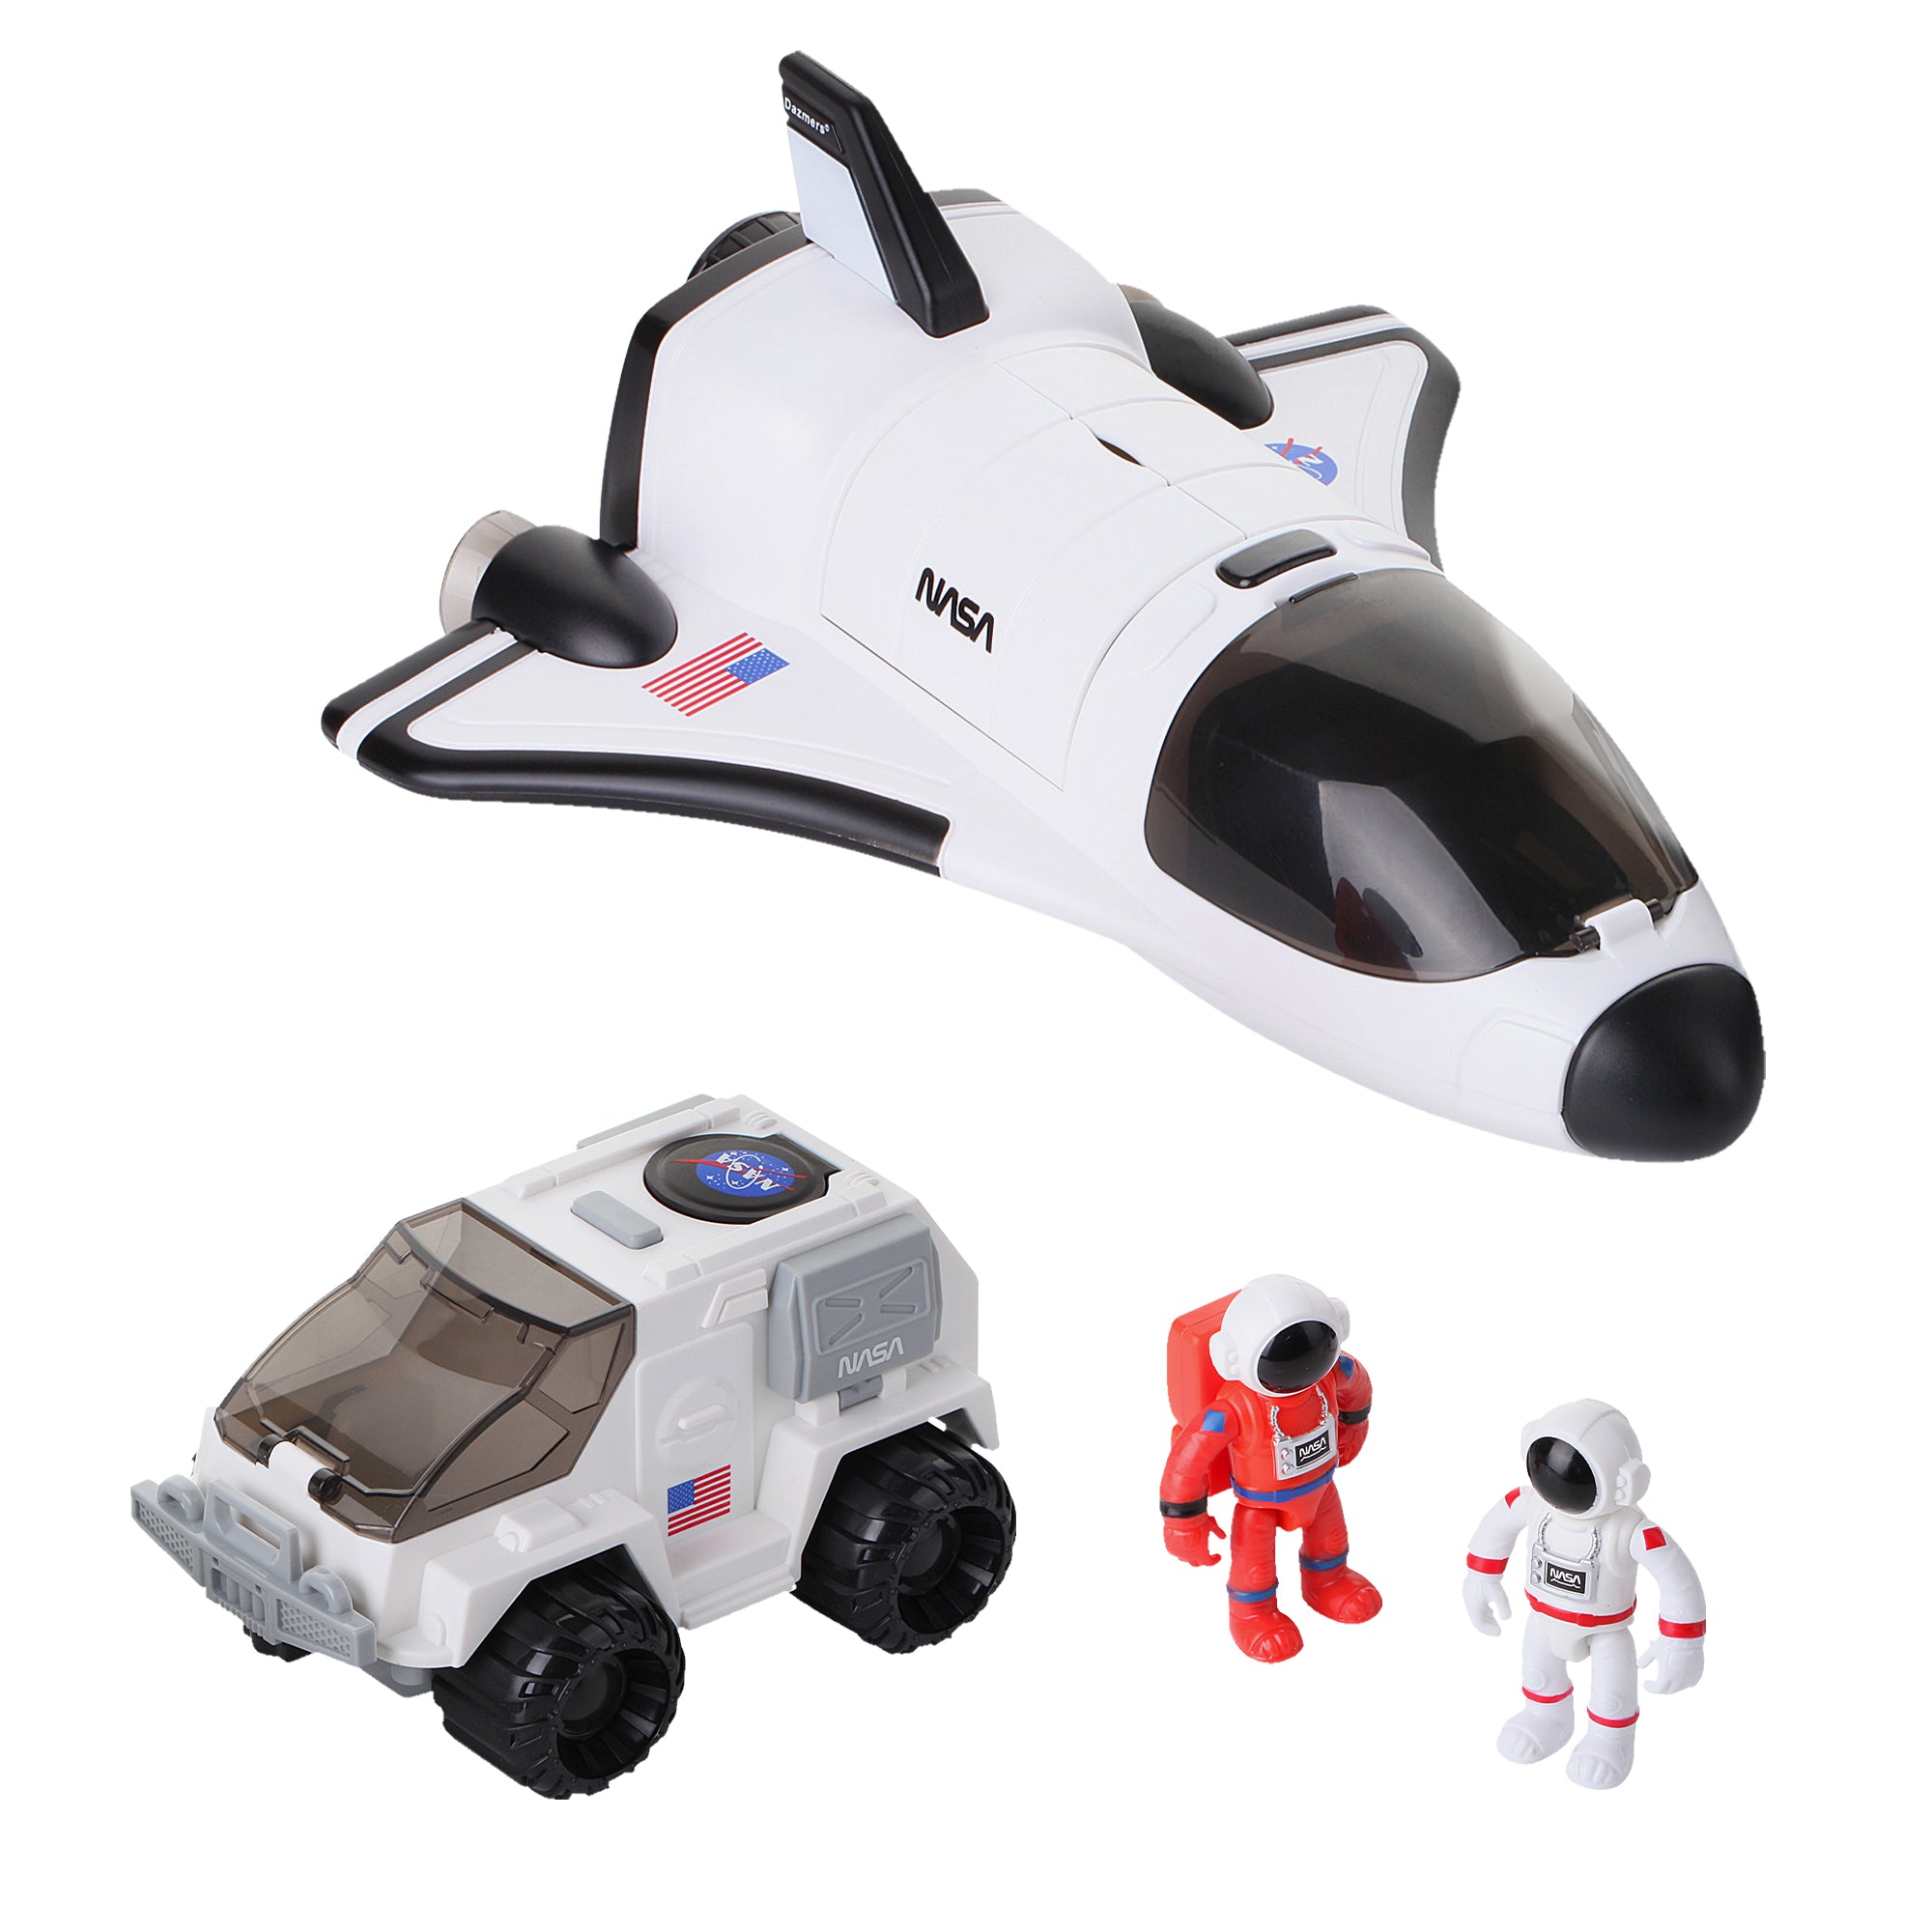 Space Shuttle Rover Set with 2 Astronauts